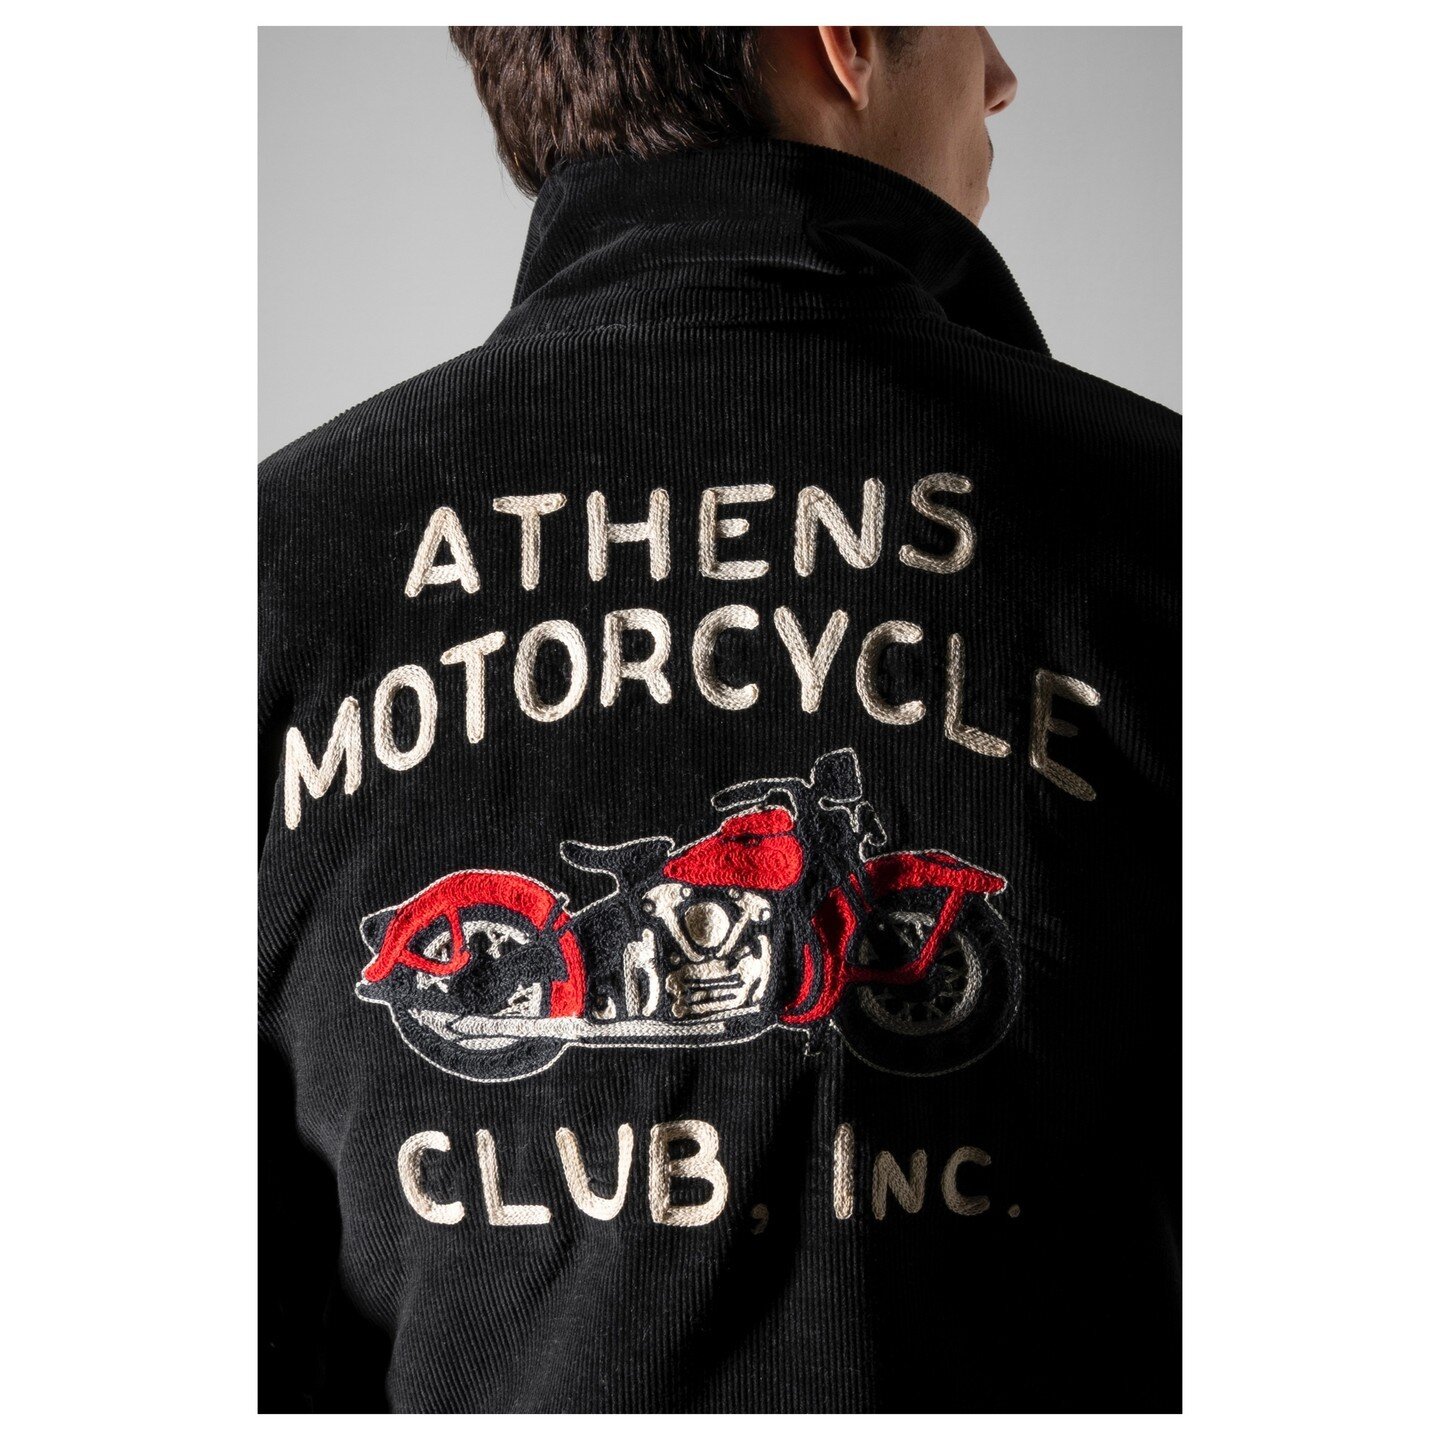 This last vintage motorcycle jacket is from the Athens Motorcycle Club and is special to our family because it's from one of my dad's close friends. We have both his jacket and his grandfather's, both personalized on the front as well. I feel so hono